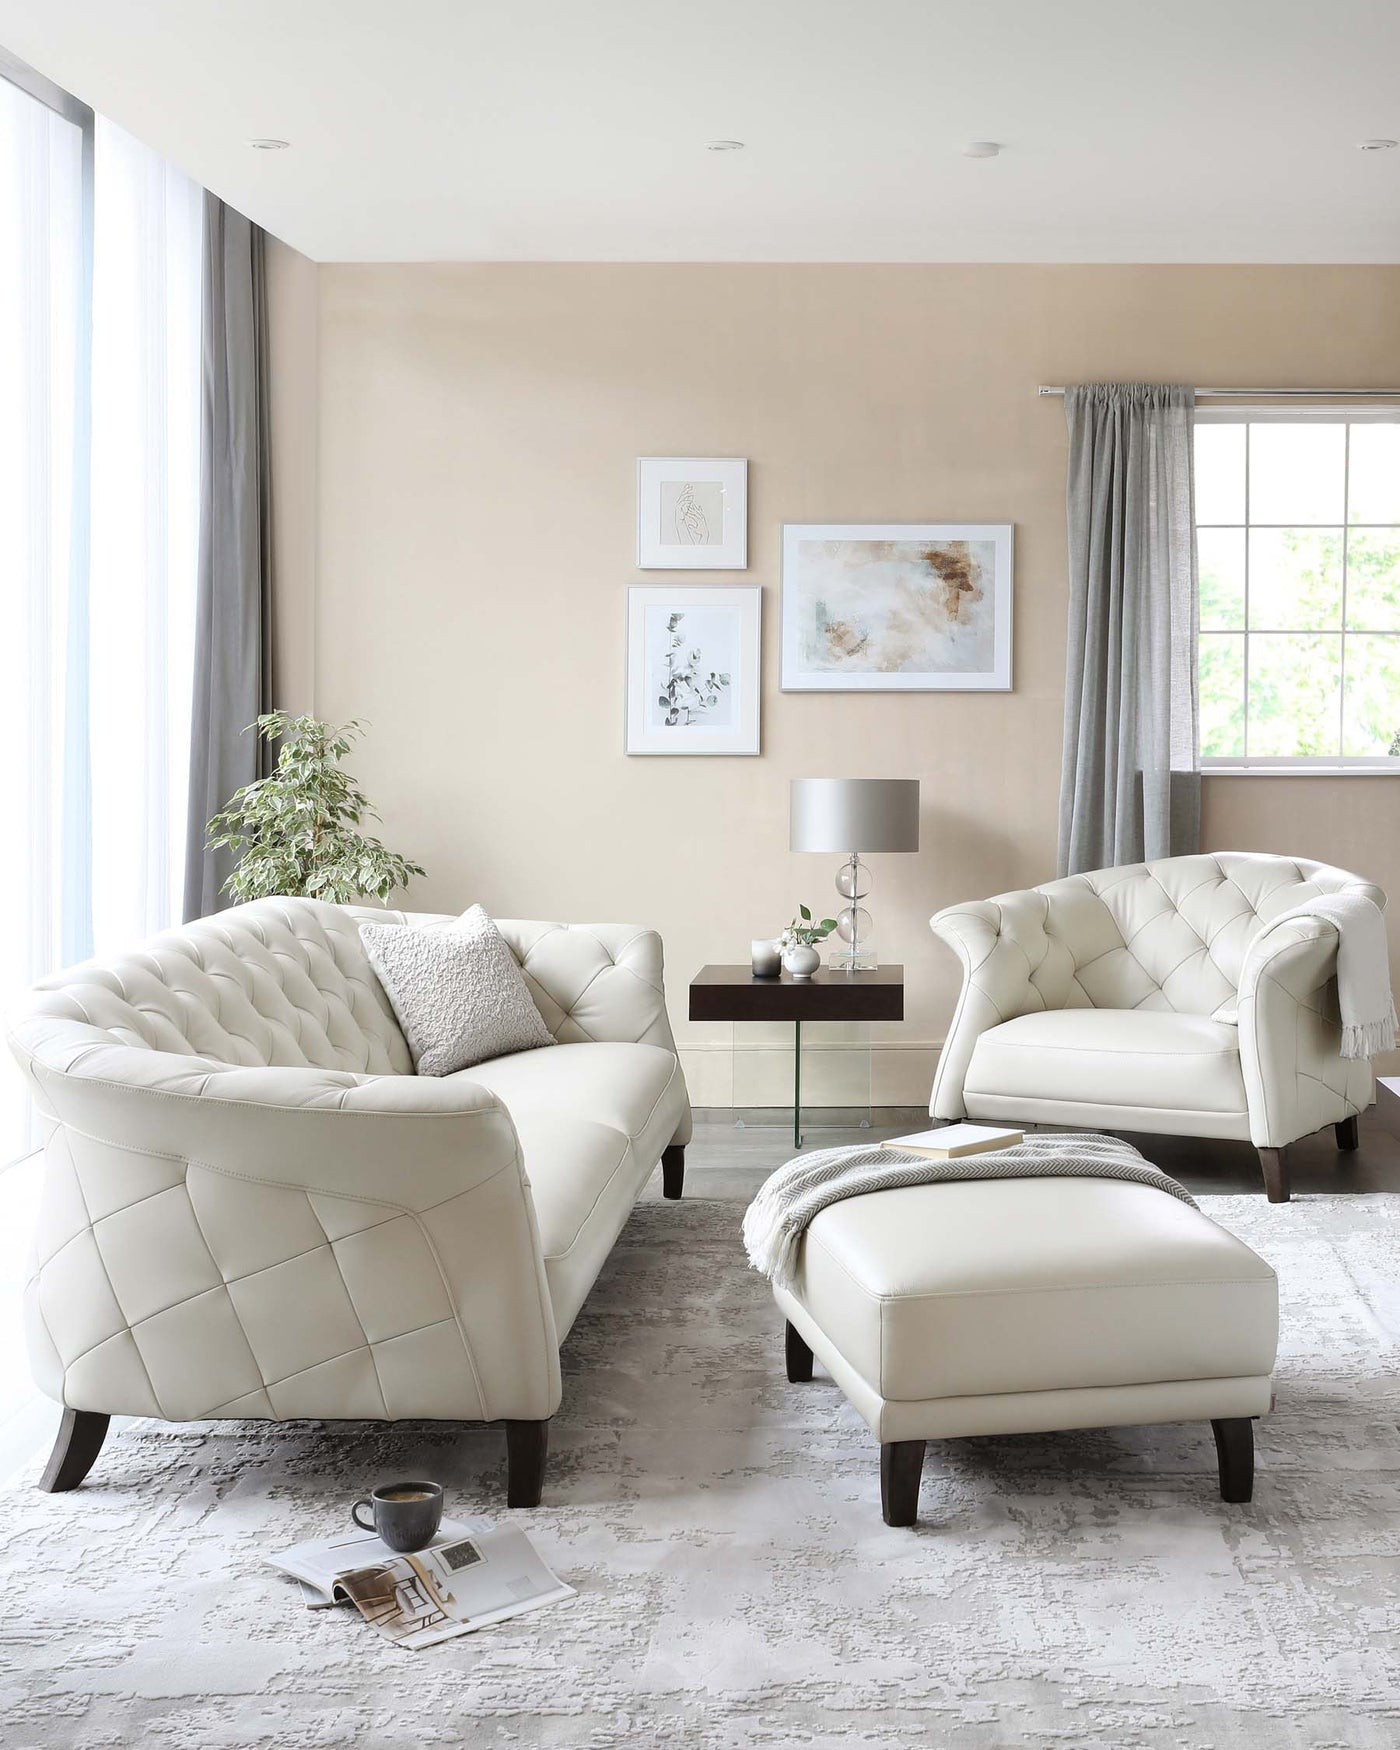 Elegant and contemporary living room set featuring a white tufted leather sofa with matching armchair and ottoman. The sofa and armchair have curved outlines and are adorned with diamond-patterned stitching, resting on dark wooden legs. A sleek, wooden side table with a small lamp complement the arrangement, placed on a textured light grey area rug.